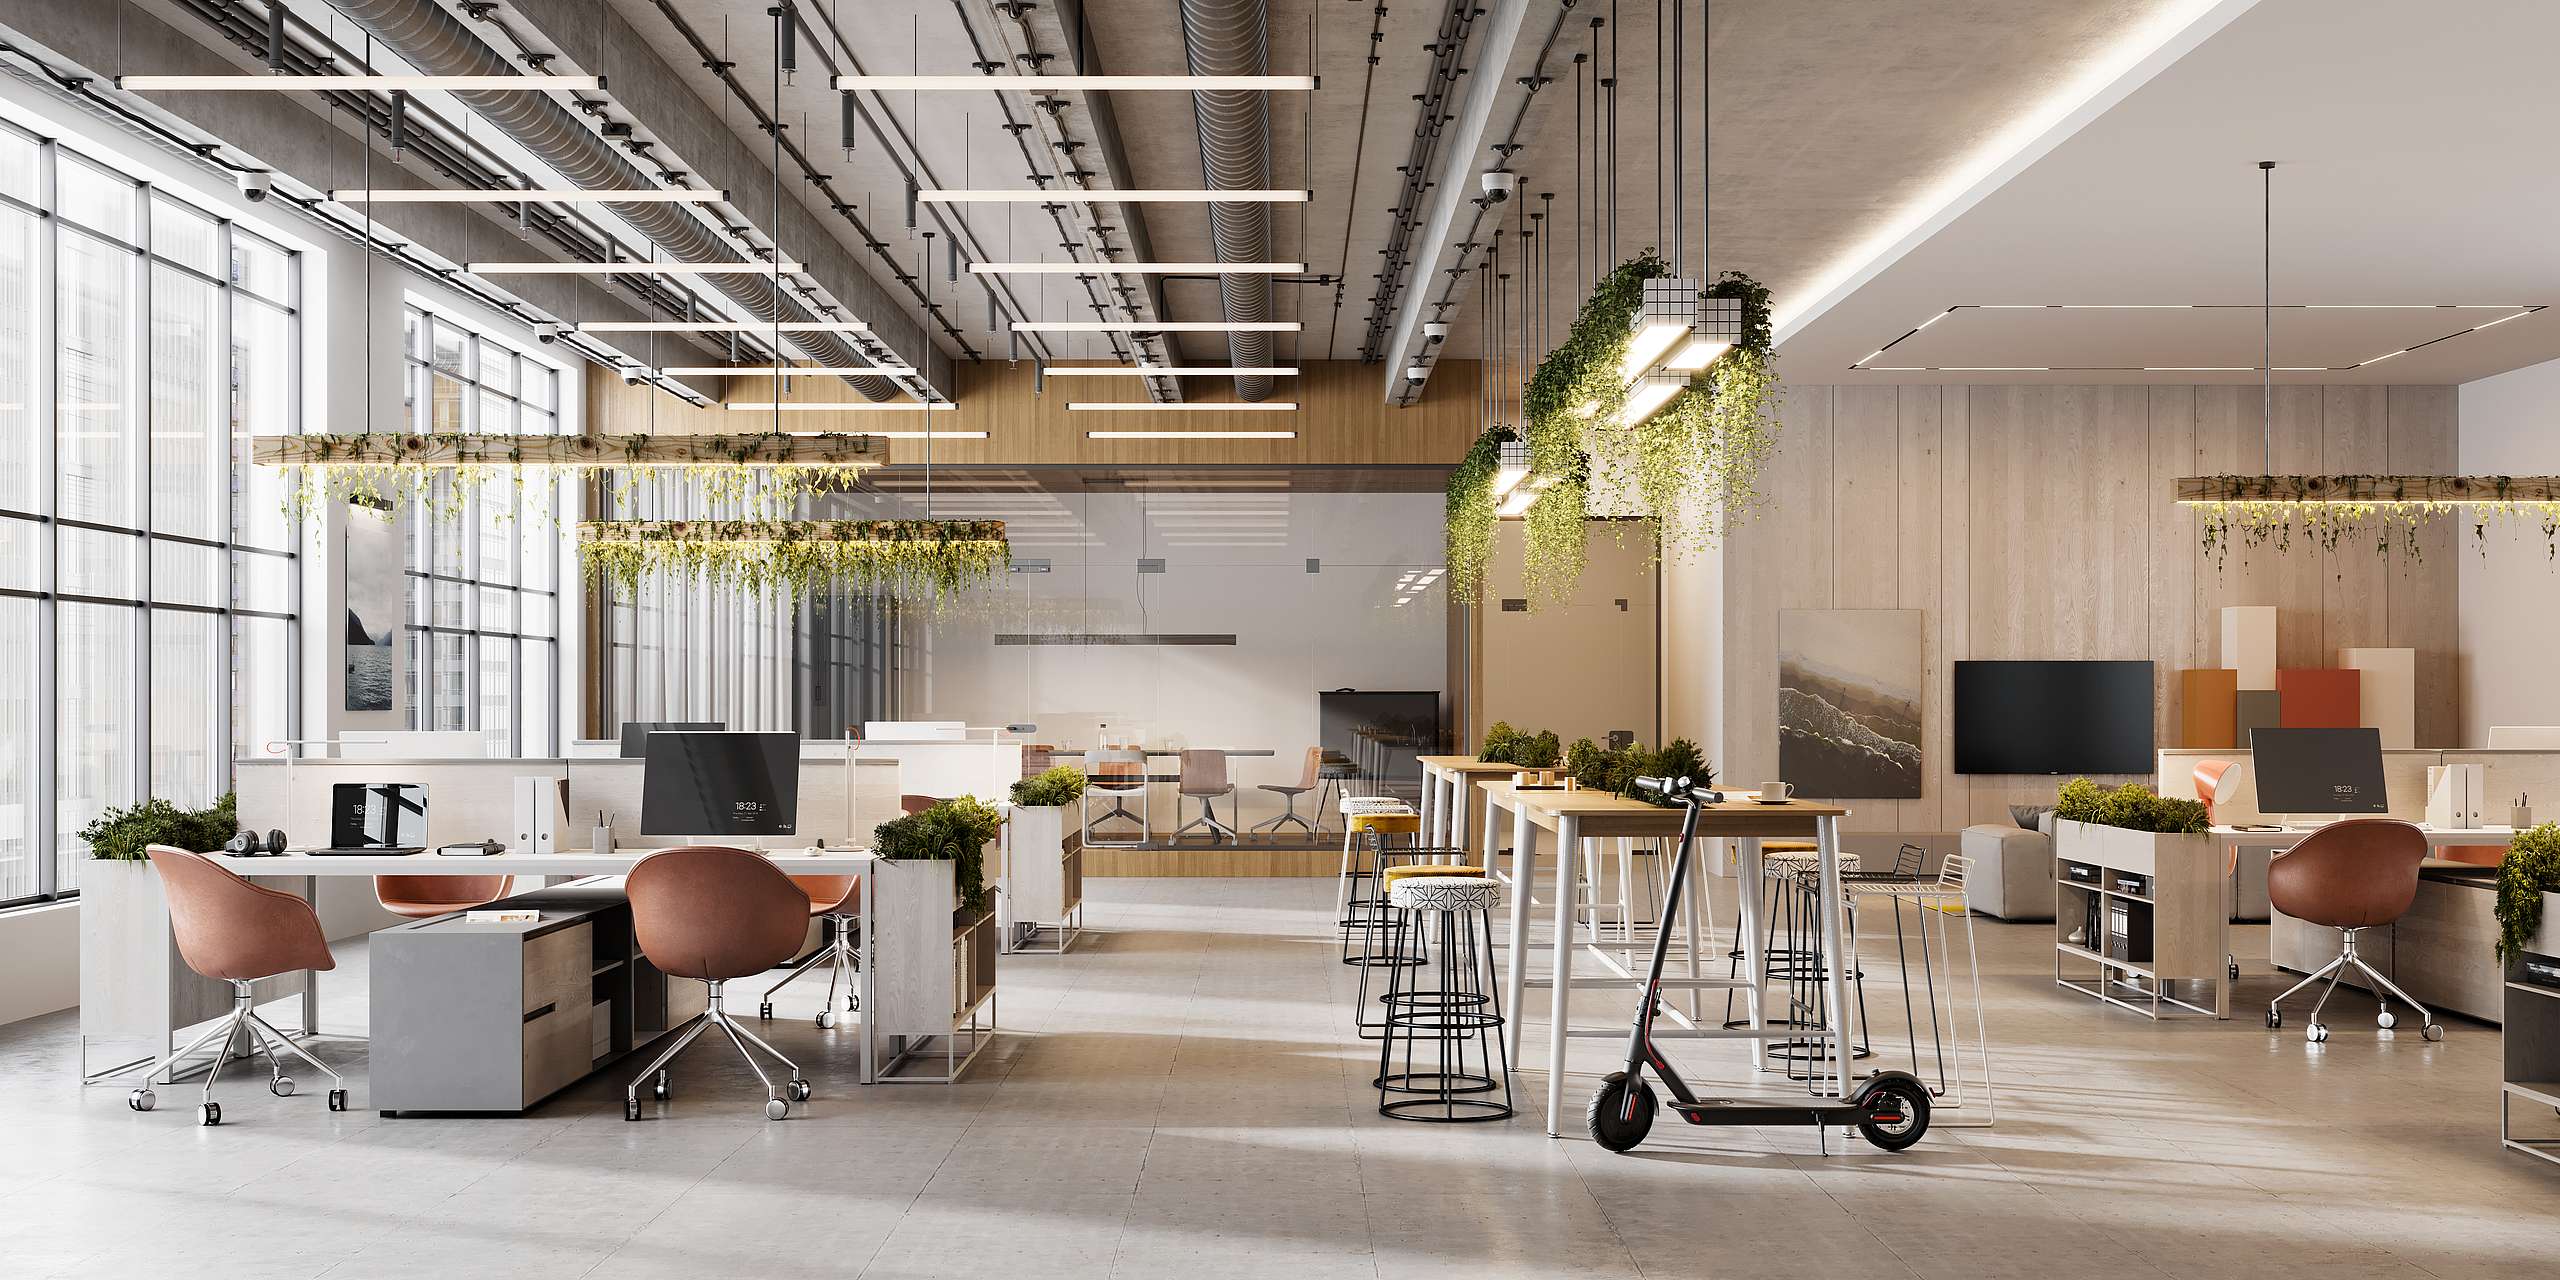 open plan office that is a light grey, with brown accents, such as chairs. Plus with plants, showing a green/energy efficient office.